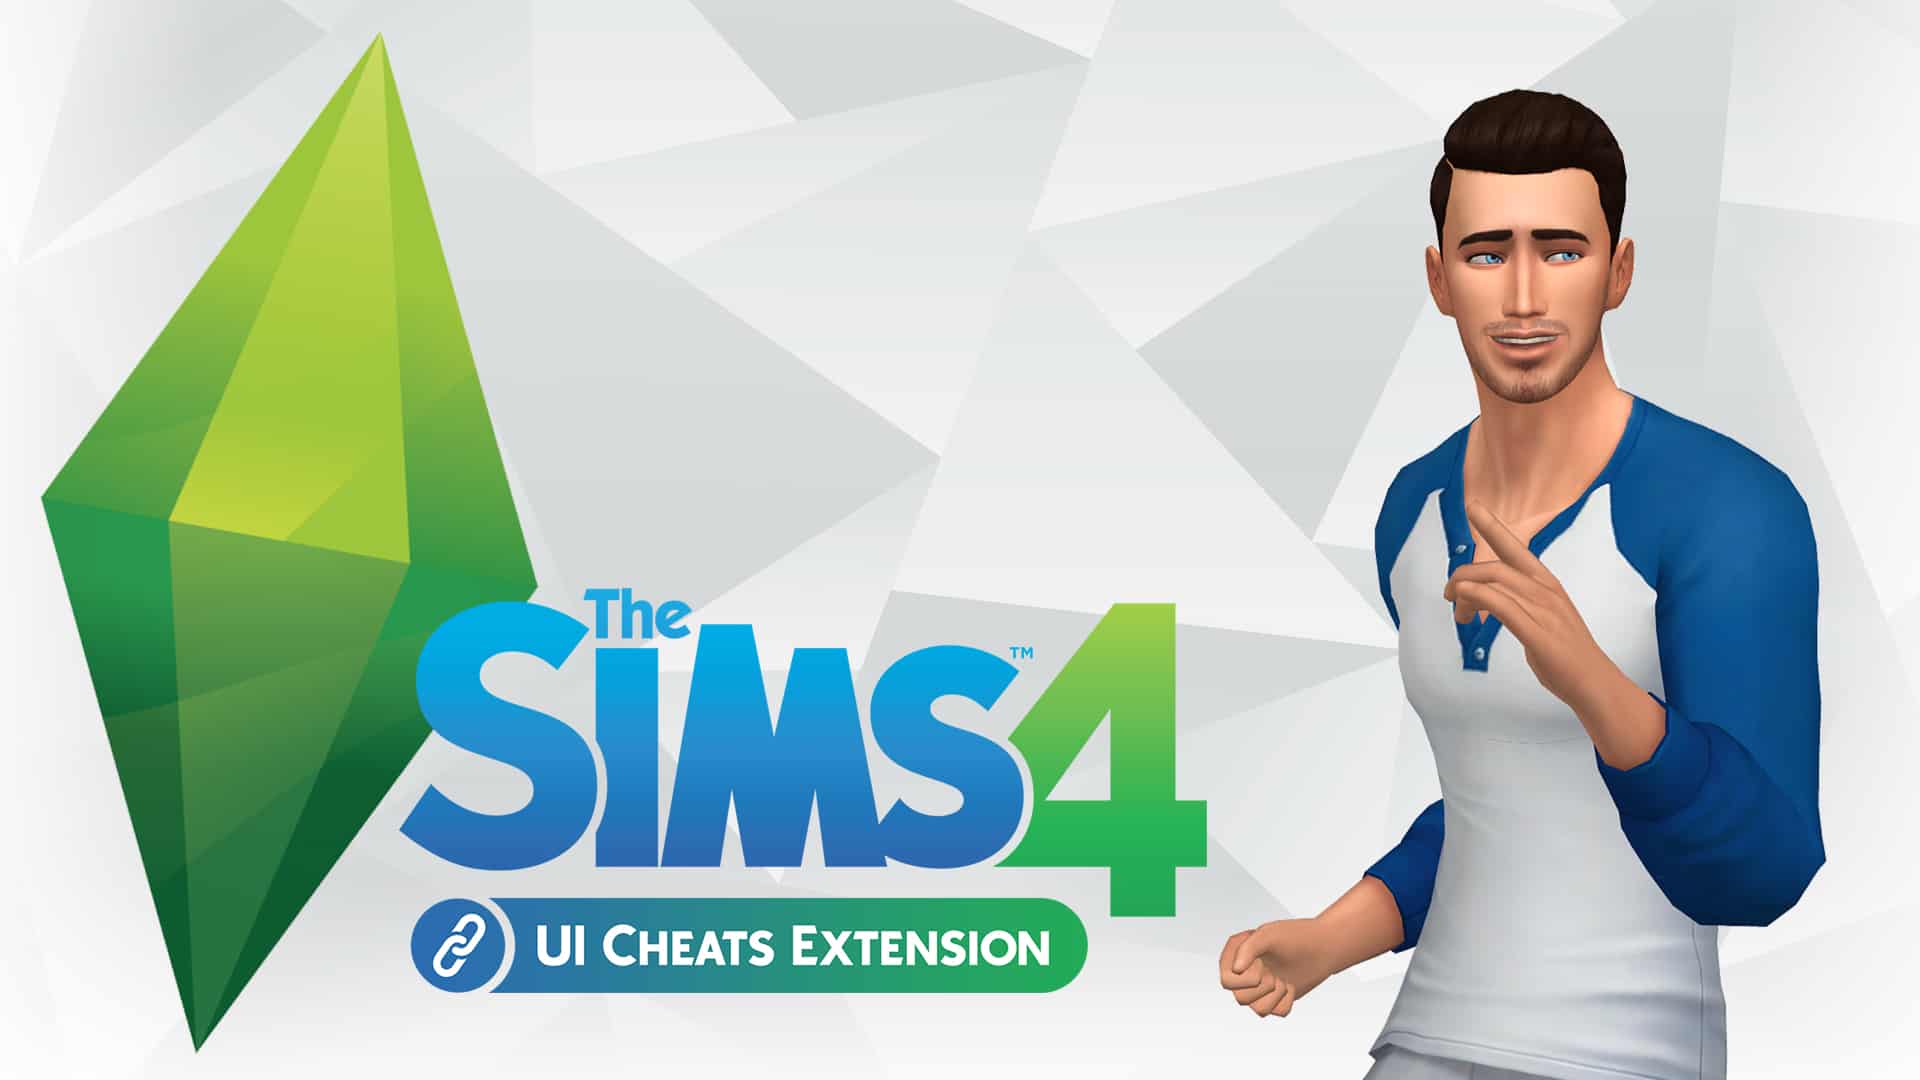 What Is The Sims 4 Legacy Edition, and Do You Need It?